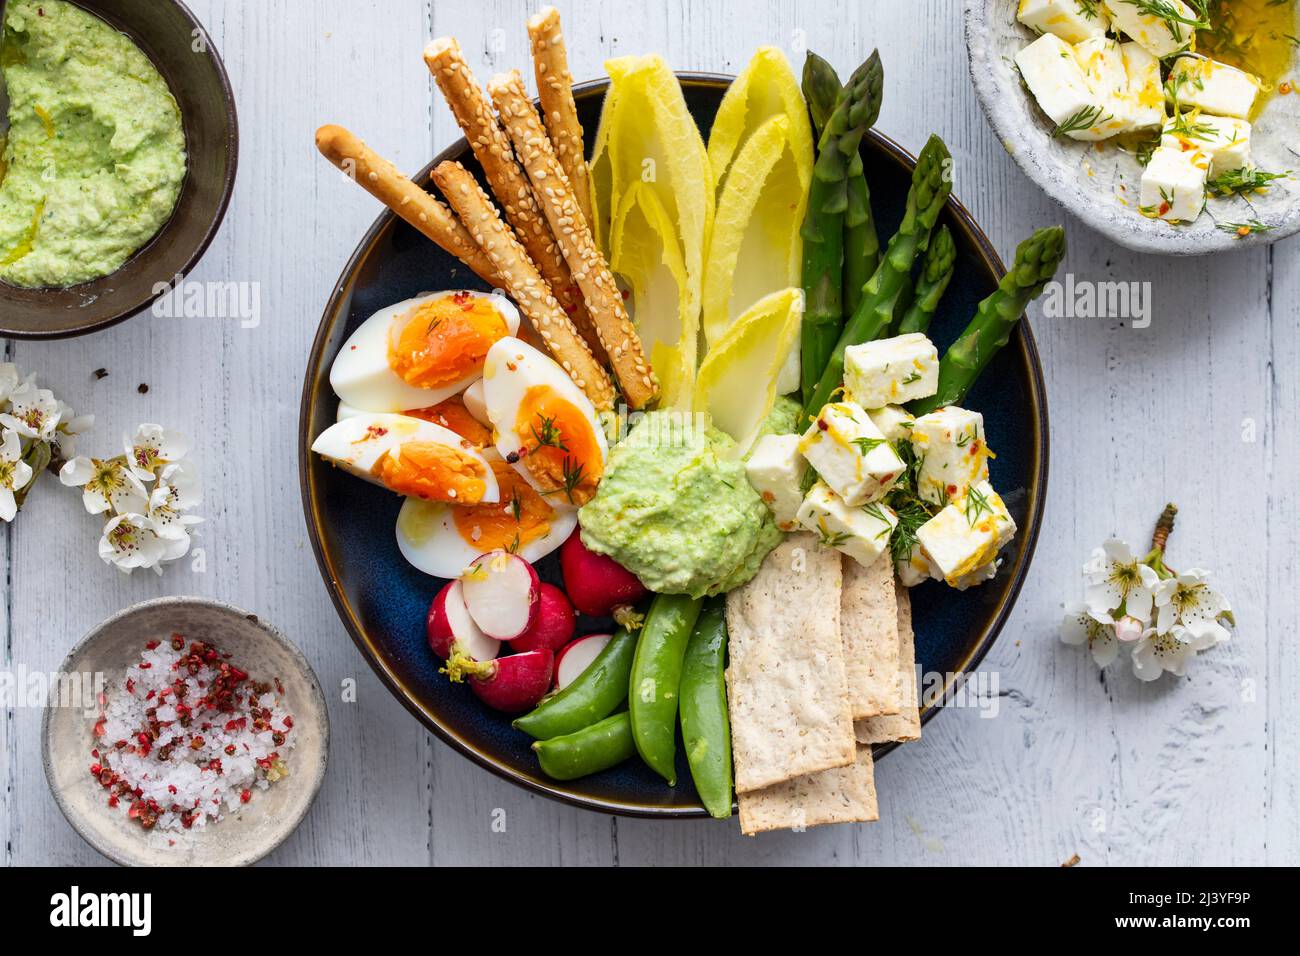 Easter sharing platter with eggs, asparagus, crunchy vegetables and feta Stock Photo